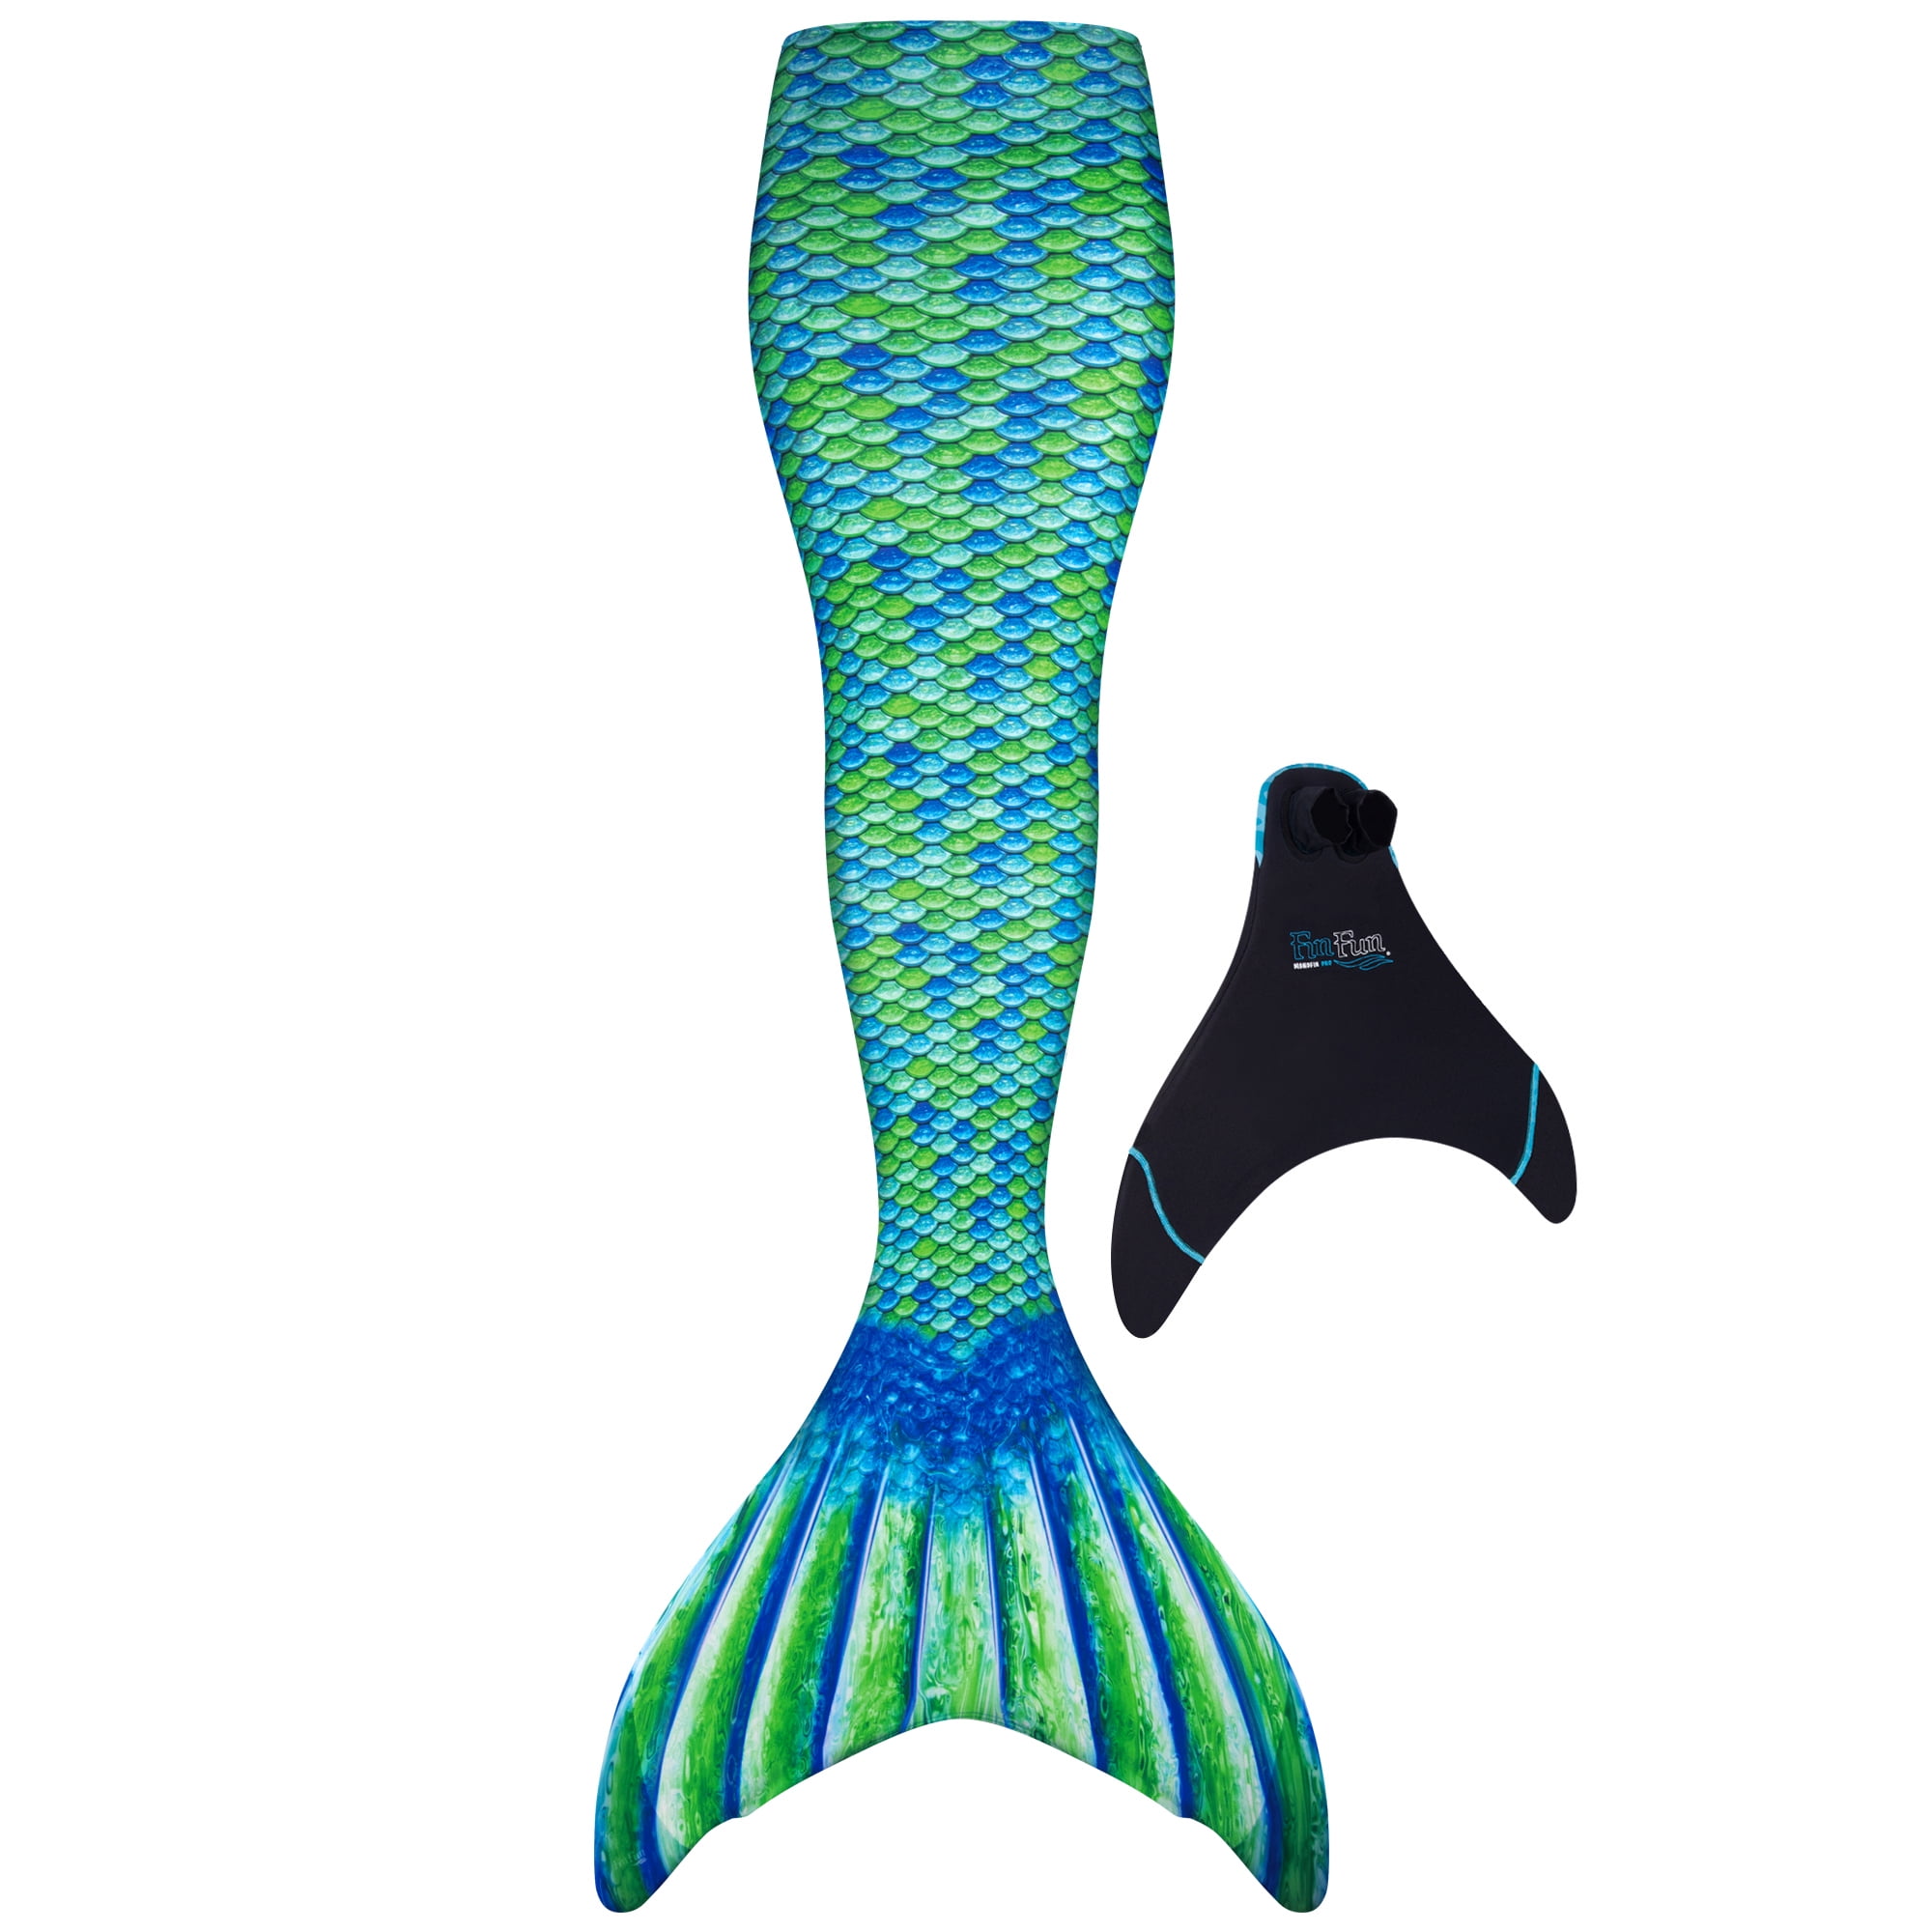 Mermaid Tails by Fin Fun with Monofin for Swimming - in Kids and Adult  Sizes 